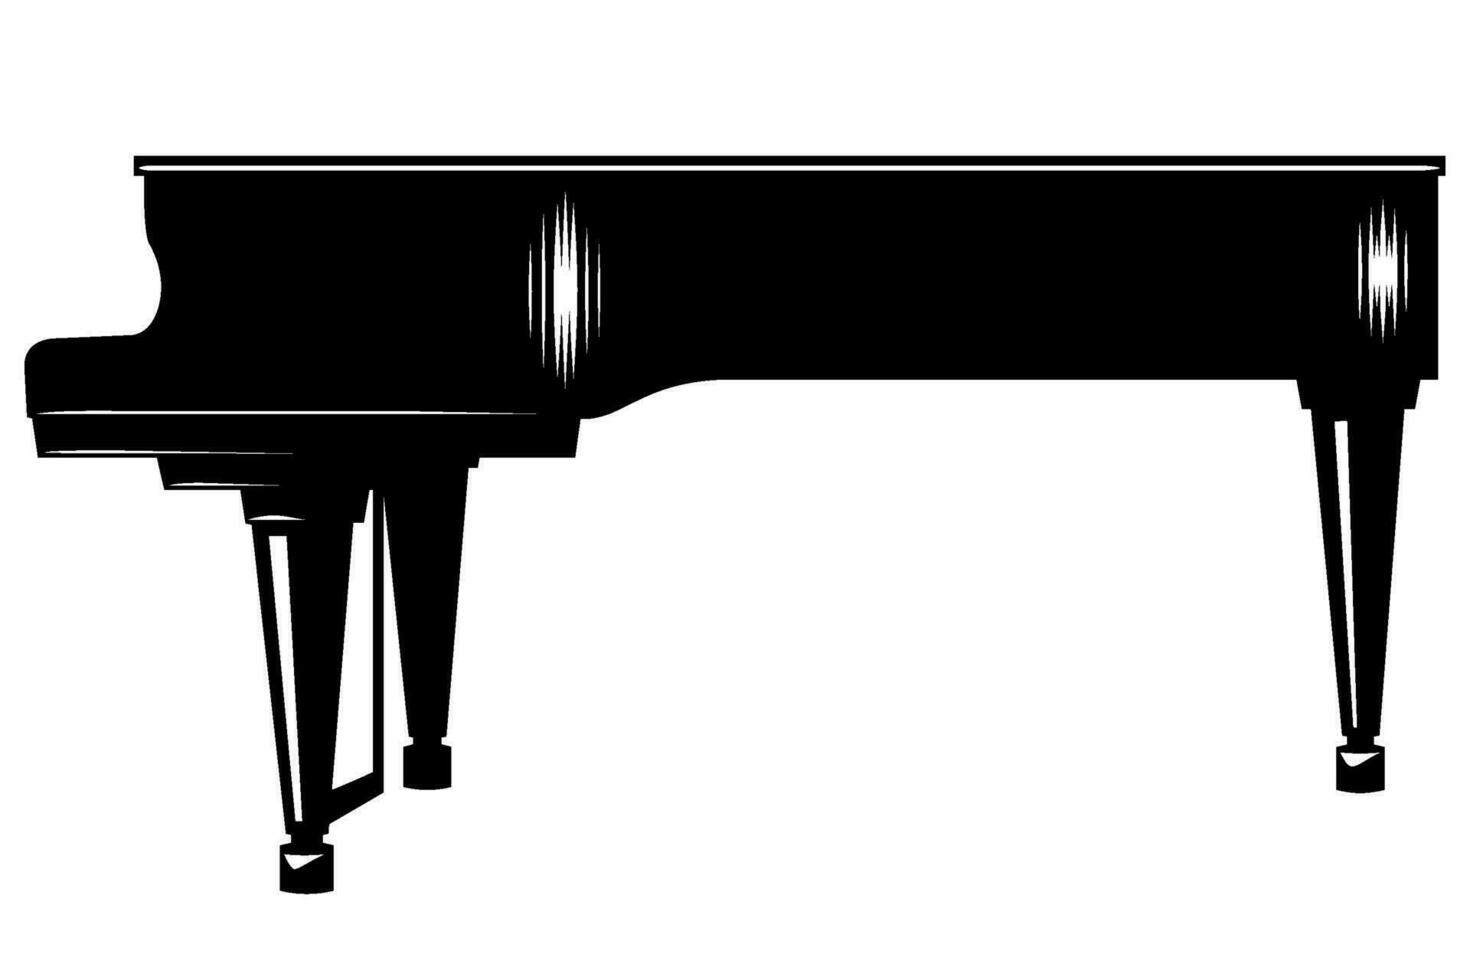 Piano. Music instrument silhouette. Outline vector clipart isolated on white.